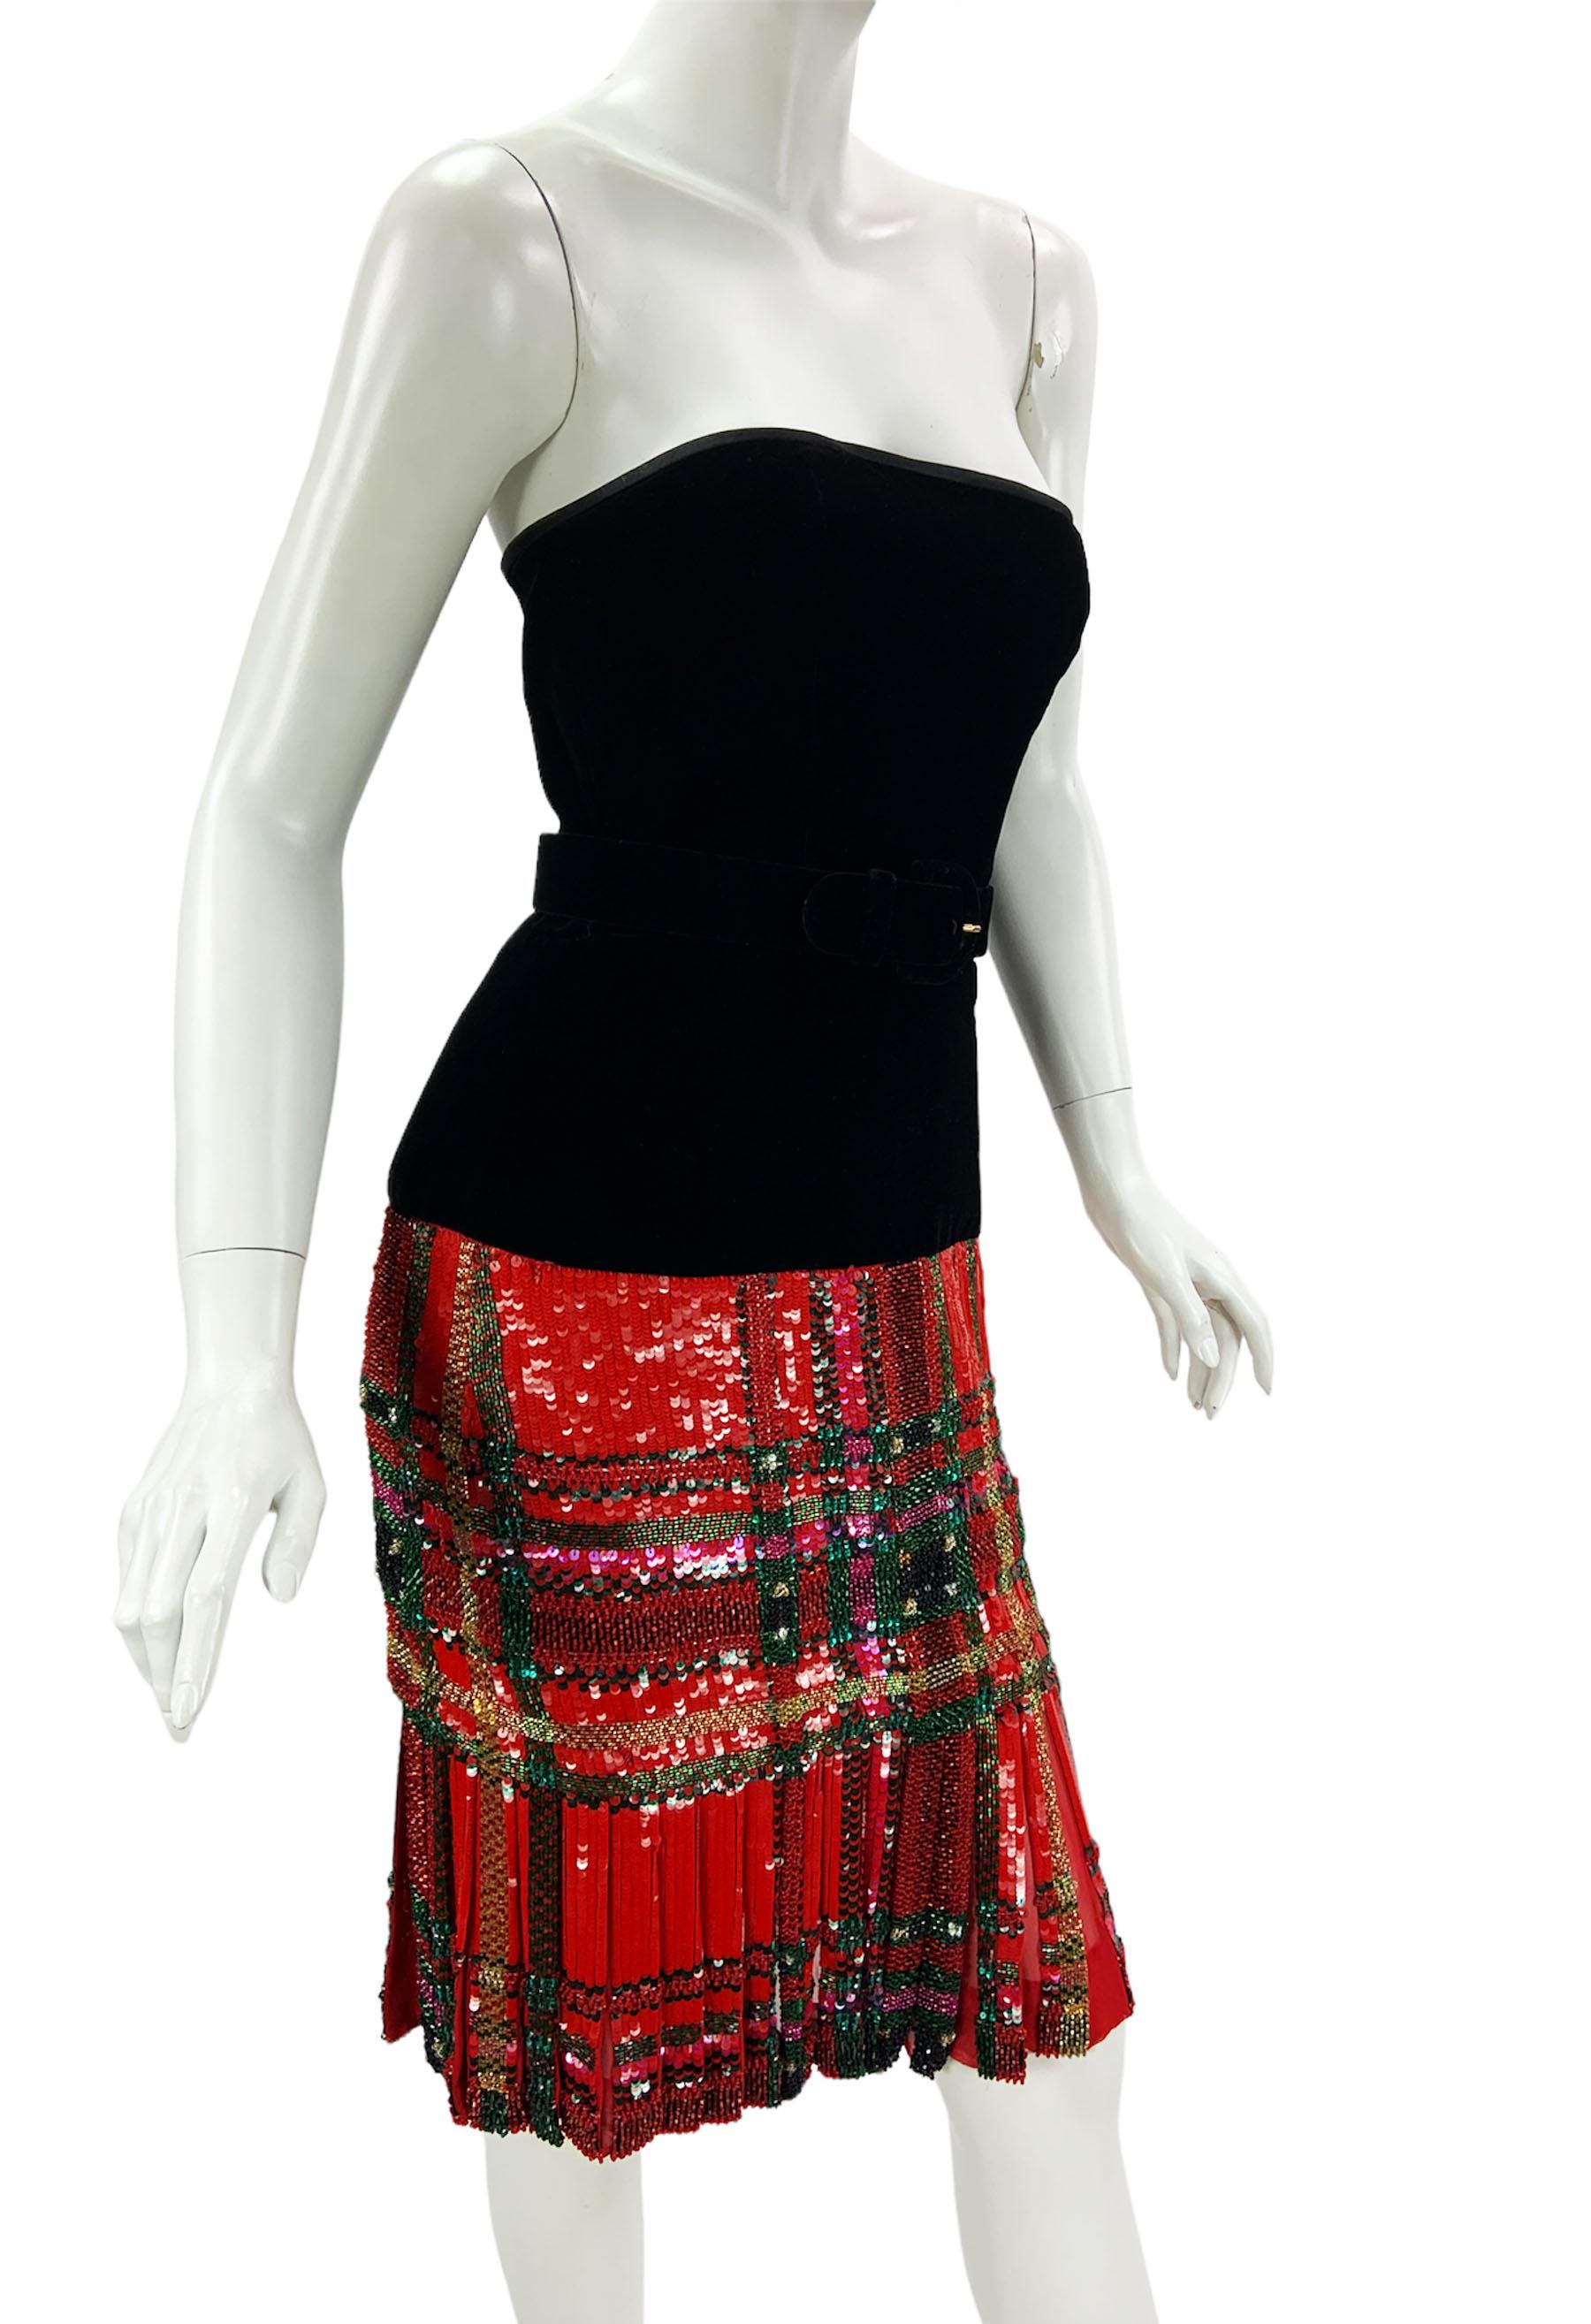 Oscar de la Renta Tartan Plaid Embellished Belted Velvet Dress
F/W 1991 Collection
US size 4
Black Velvet Top Contrasting with the Red Silk Pleated Fully Embellished with Colorful Beads and Sequins Skirt.
Dress Finished with Corset, Fully Lined,